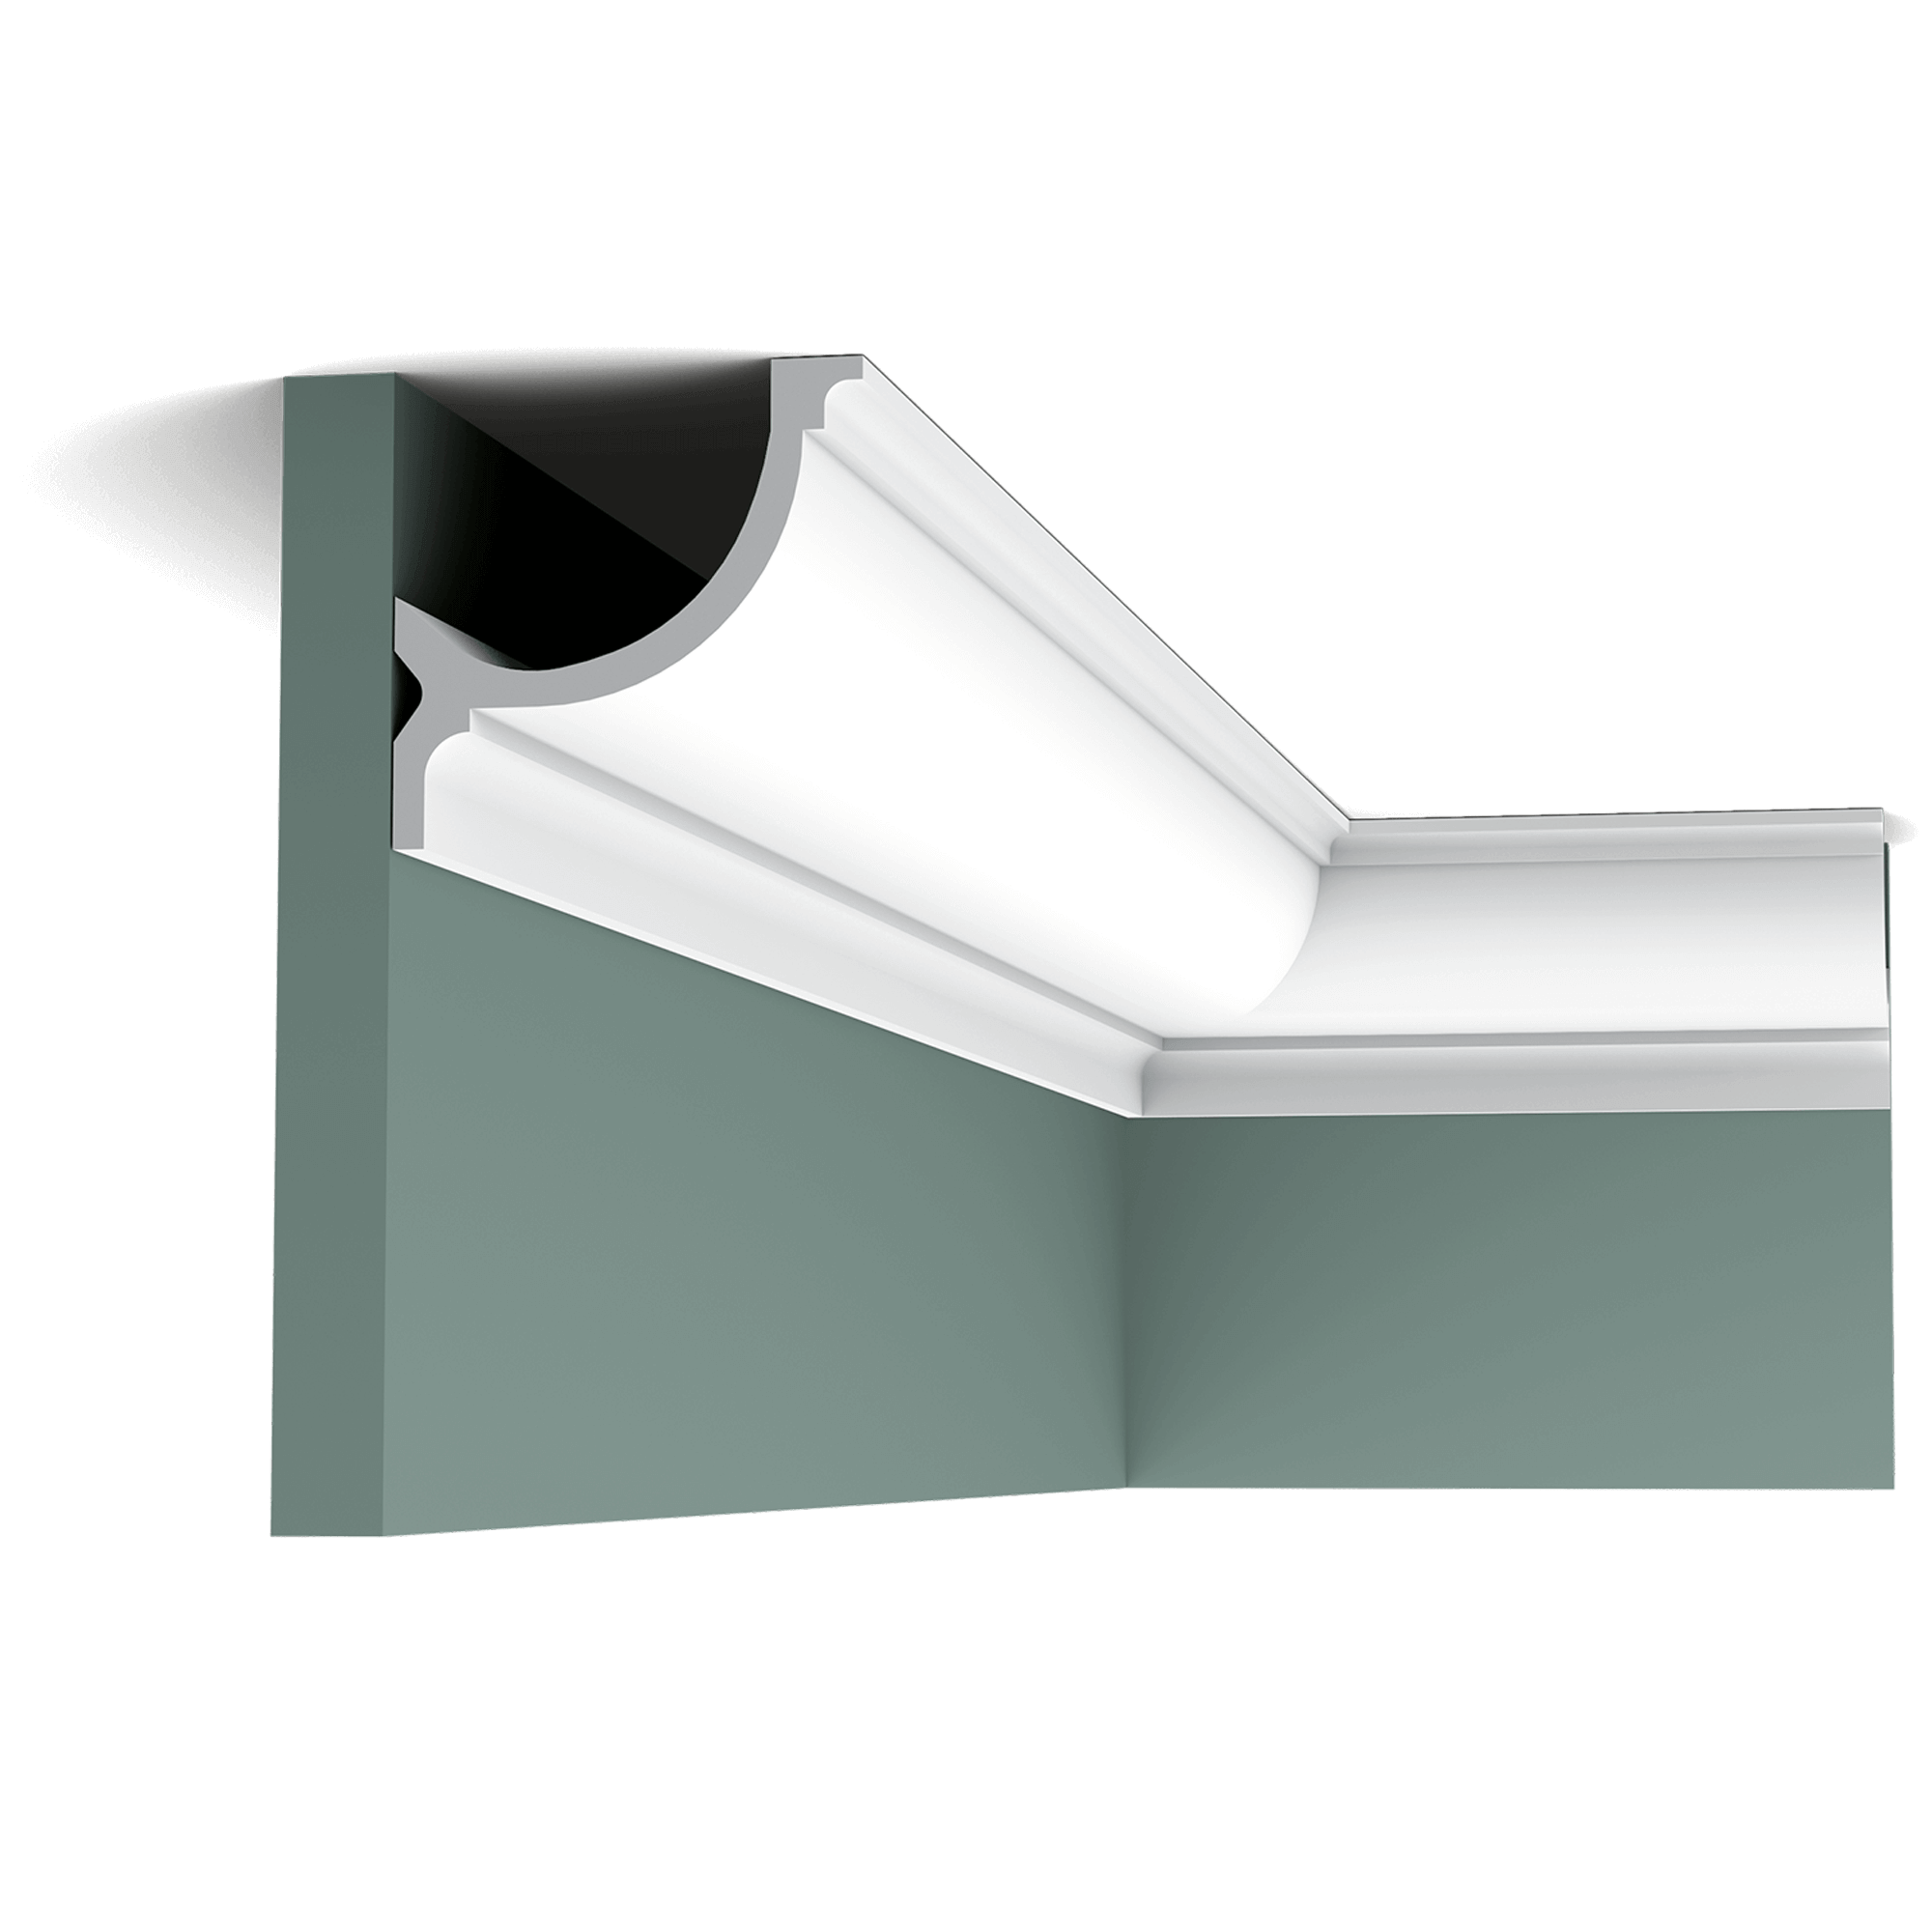 c902 cornice moulding 72d1 Smaller Ovolo-inspired cornice moulding. Fits all types of interiors effortlessly.